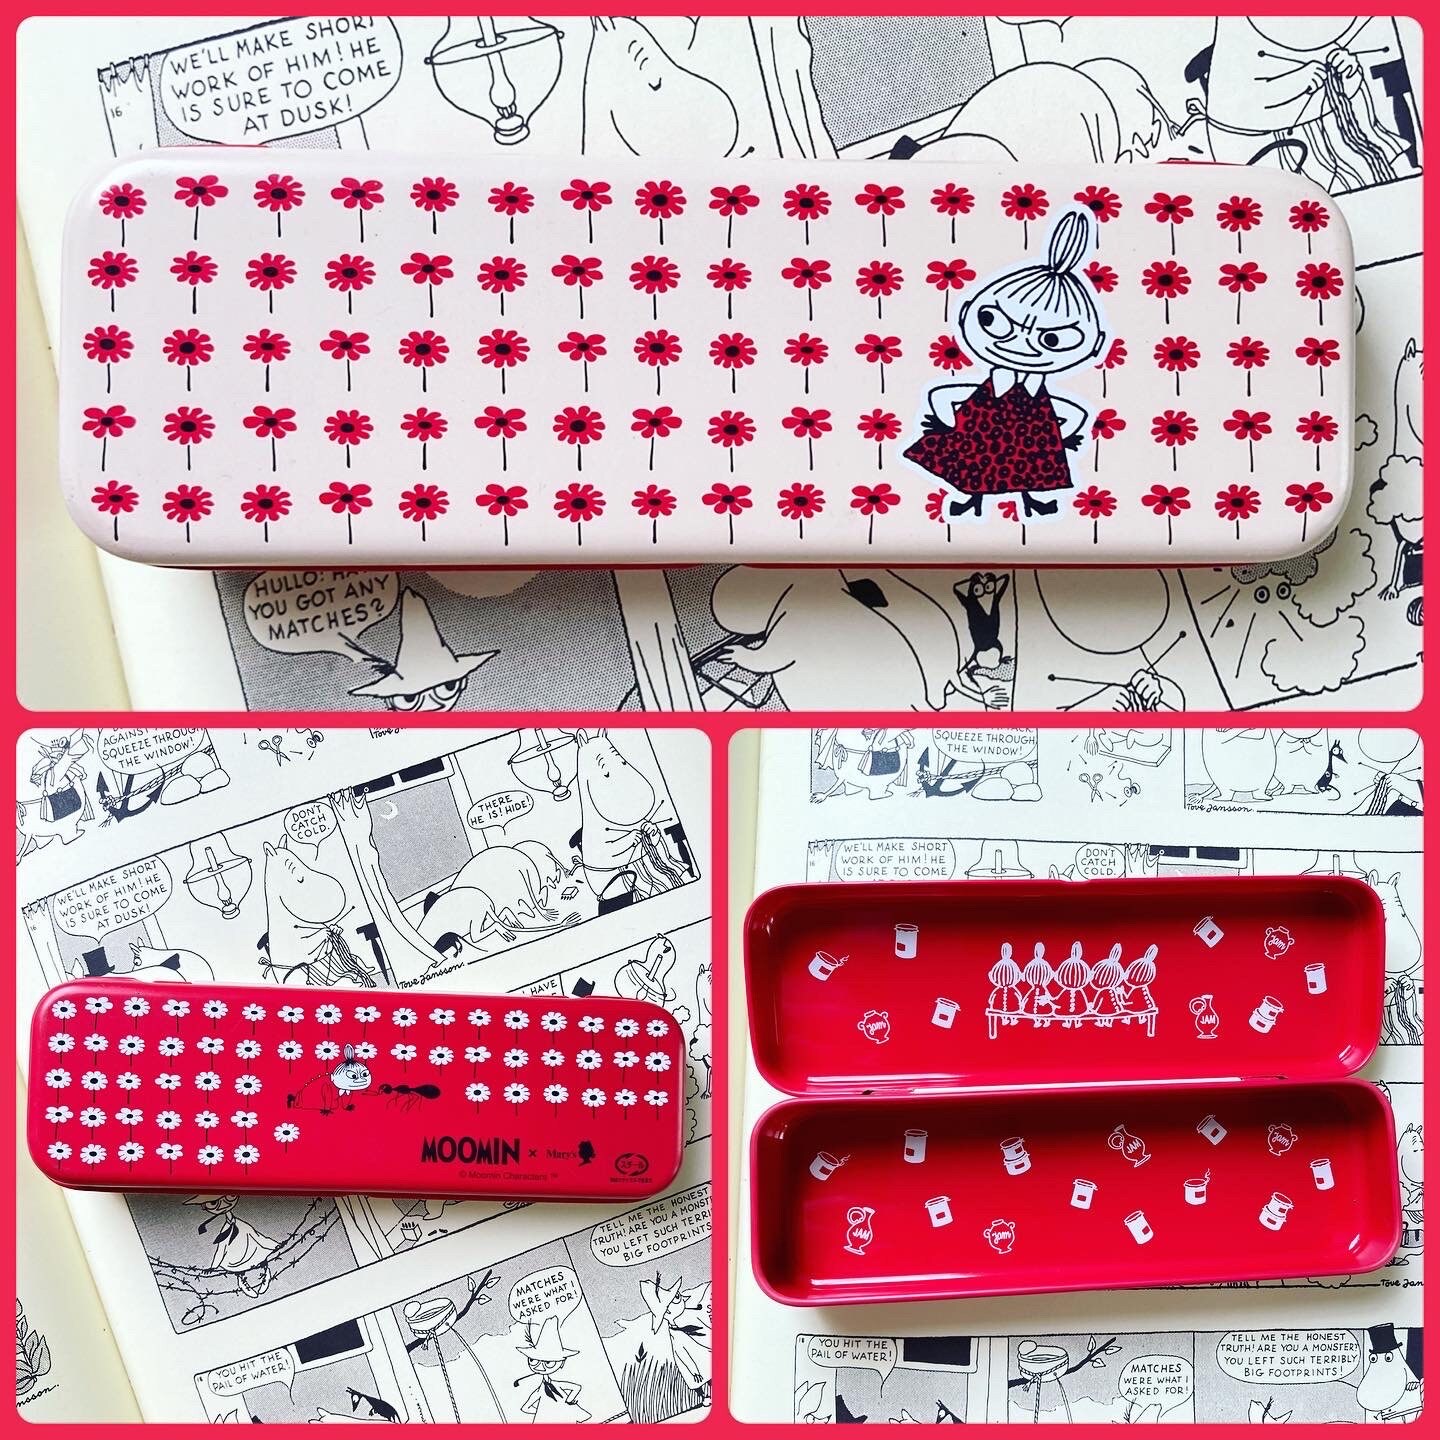 Cute Japanese Style Jelly PVC Transparent Pencil Case Storage Bag With a  Strap 